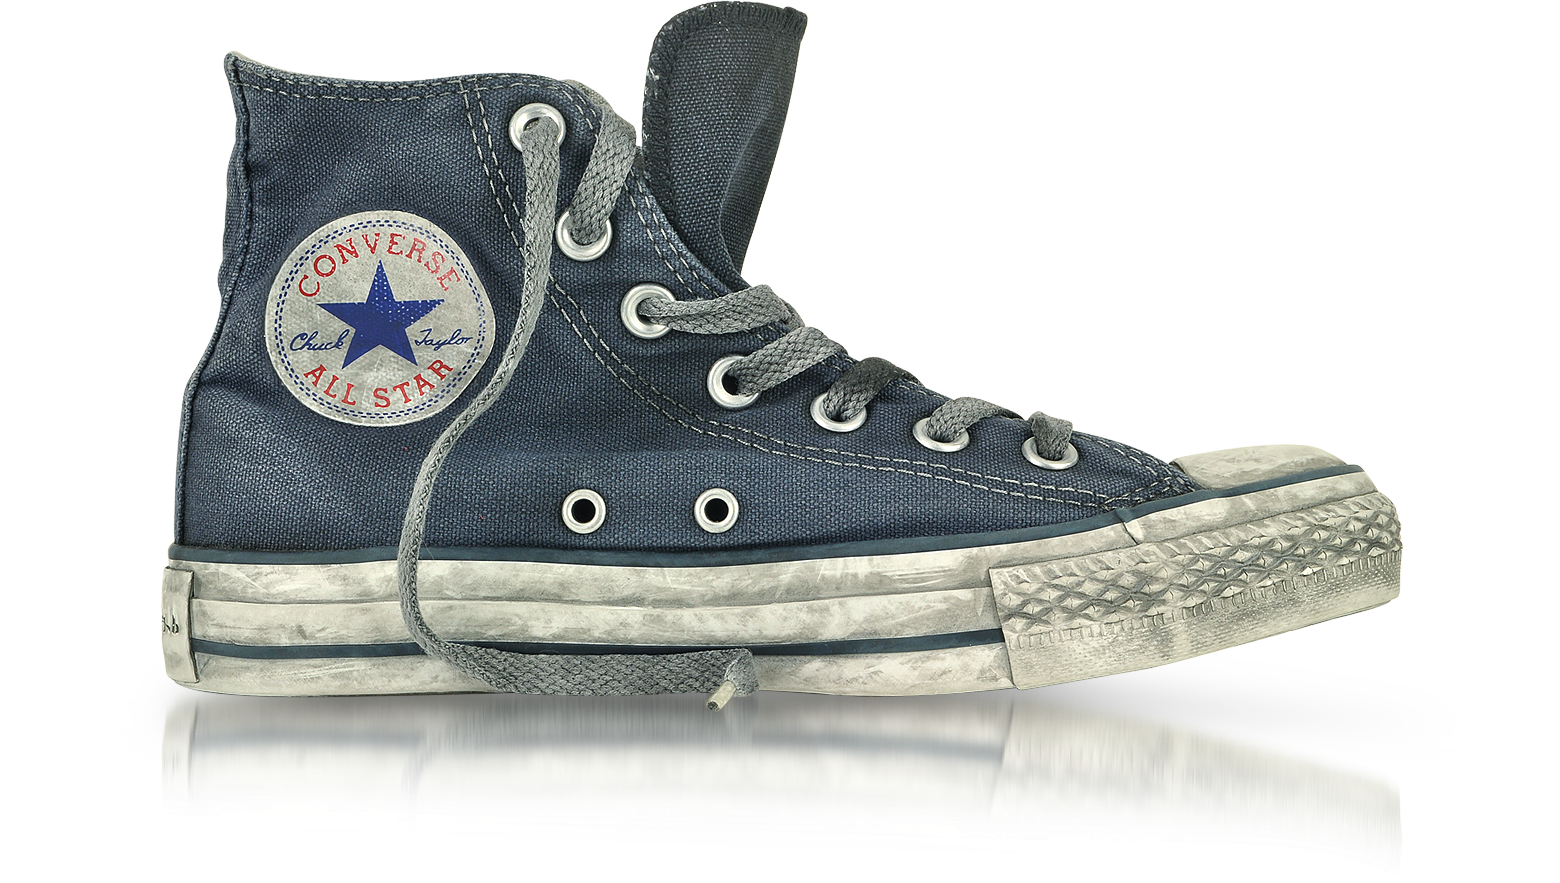 converse all star hi canvas limited edition